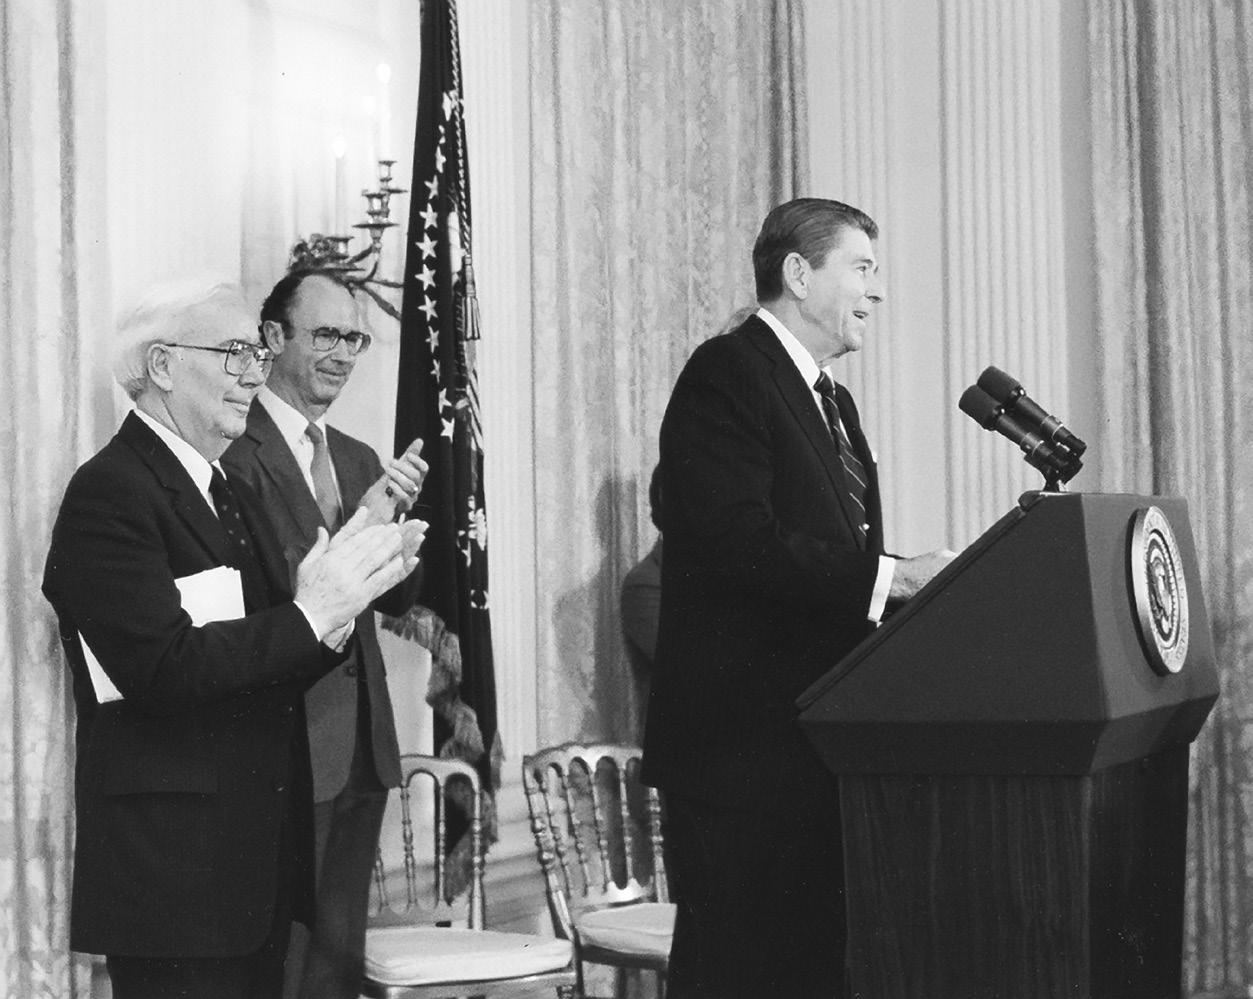 Reagan’s remarks on receiving the final report of the National Commission on Excellence in Education, 26 April 1983. T. H. Bell, David P. Gardner (chair of the commission), and President Reagan. Ronald Reagan Presidential Library.